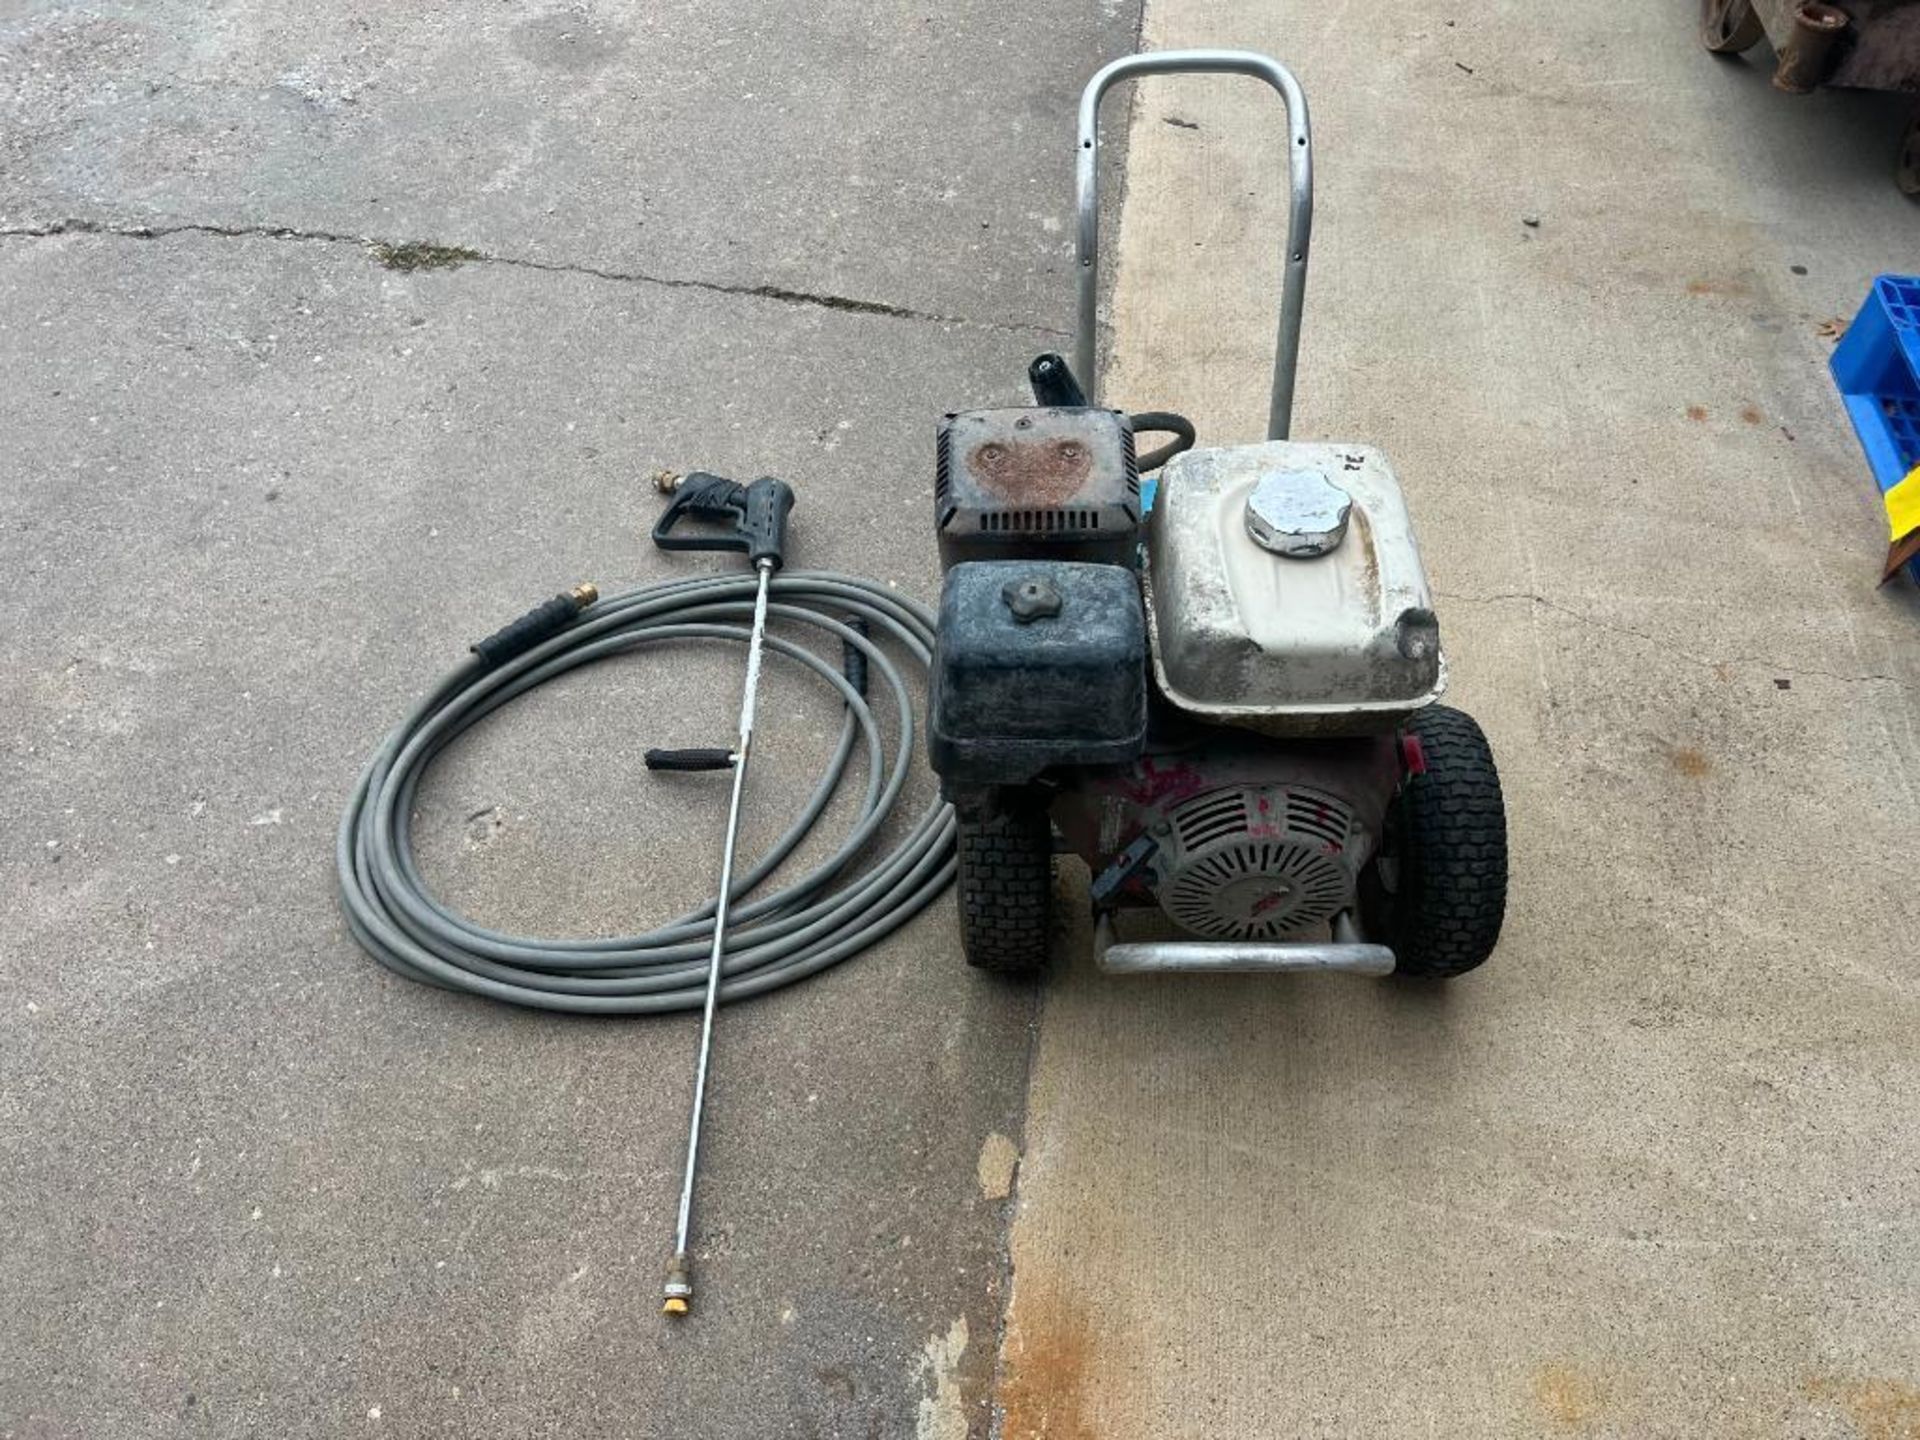 Honda Pressure Washer with Hose & Wand. Located in Mt. Pleasant, IA - Image 4 of 8